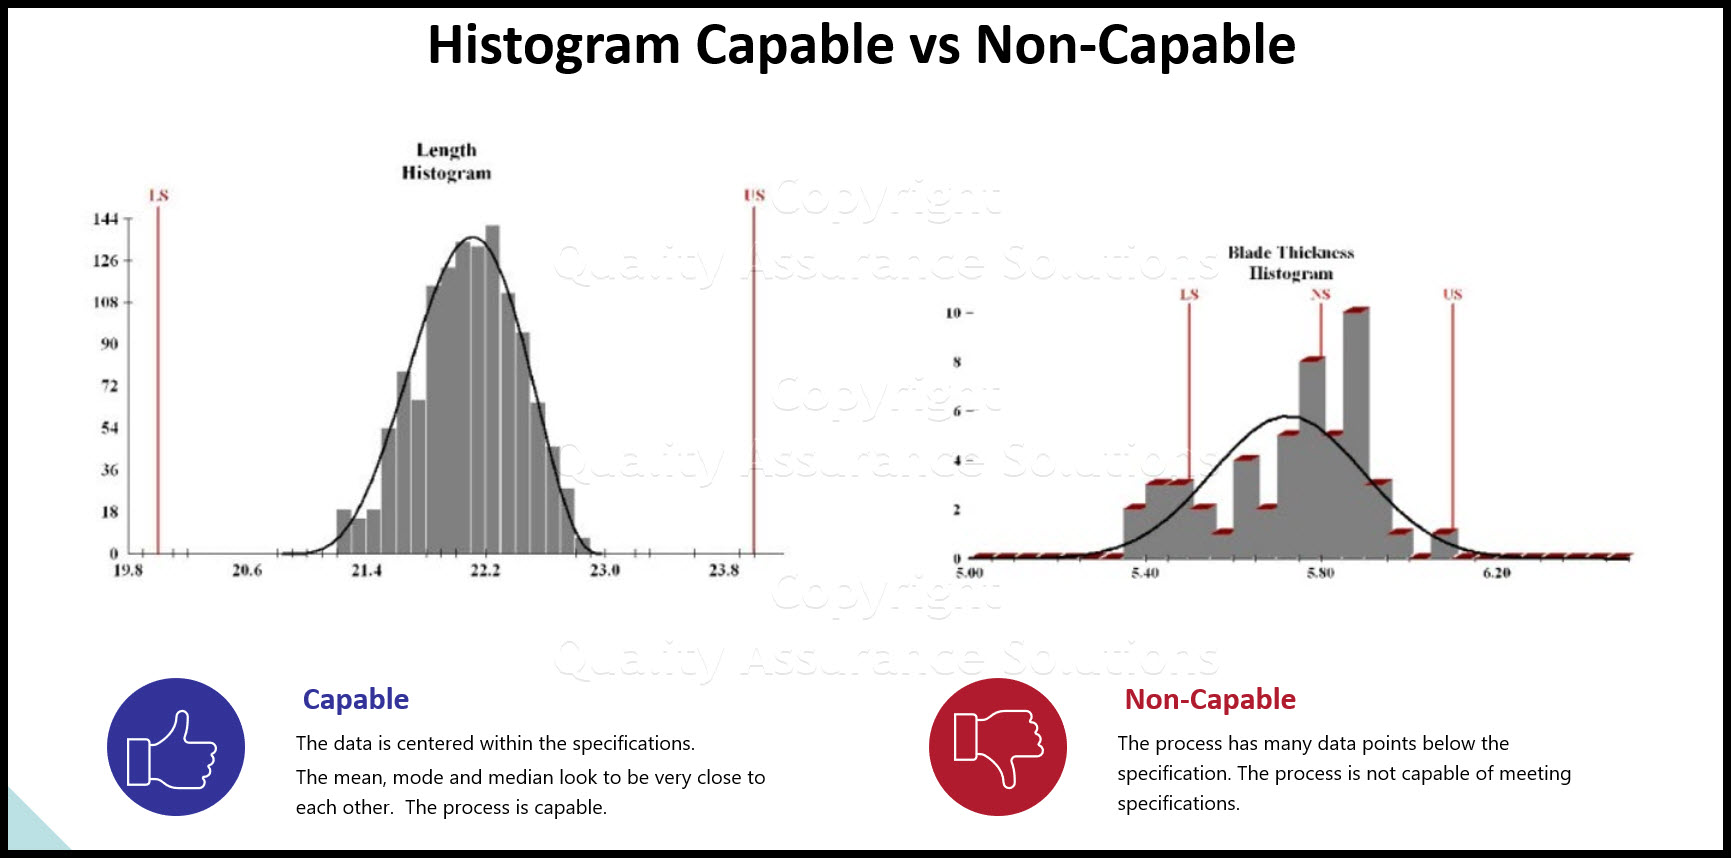 See our histogram examples. We discuss normal distribution and how it applies to quality assurance. Histograms are a key process improvement tool. 